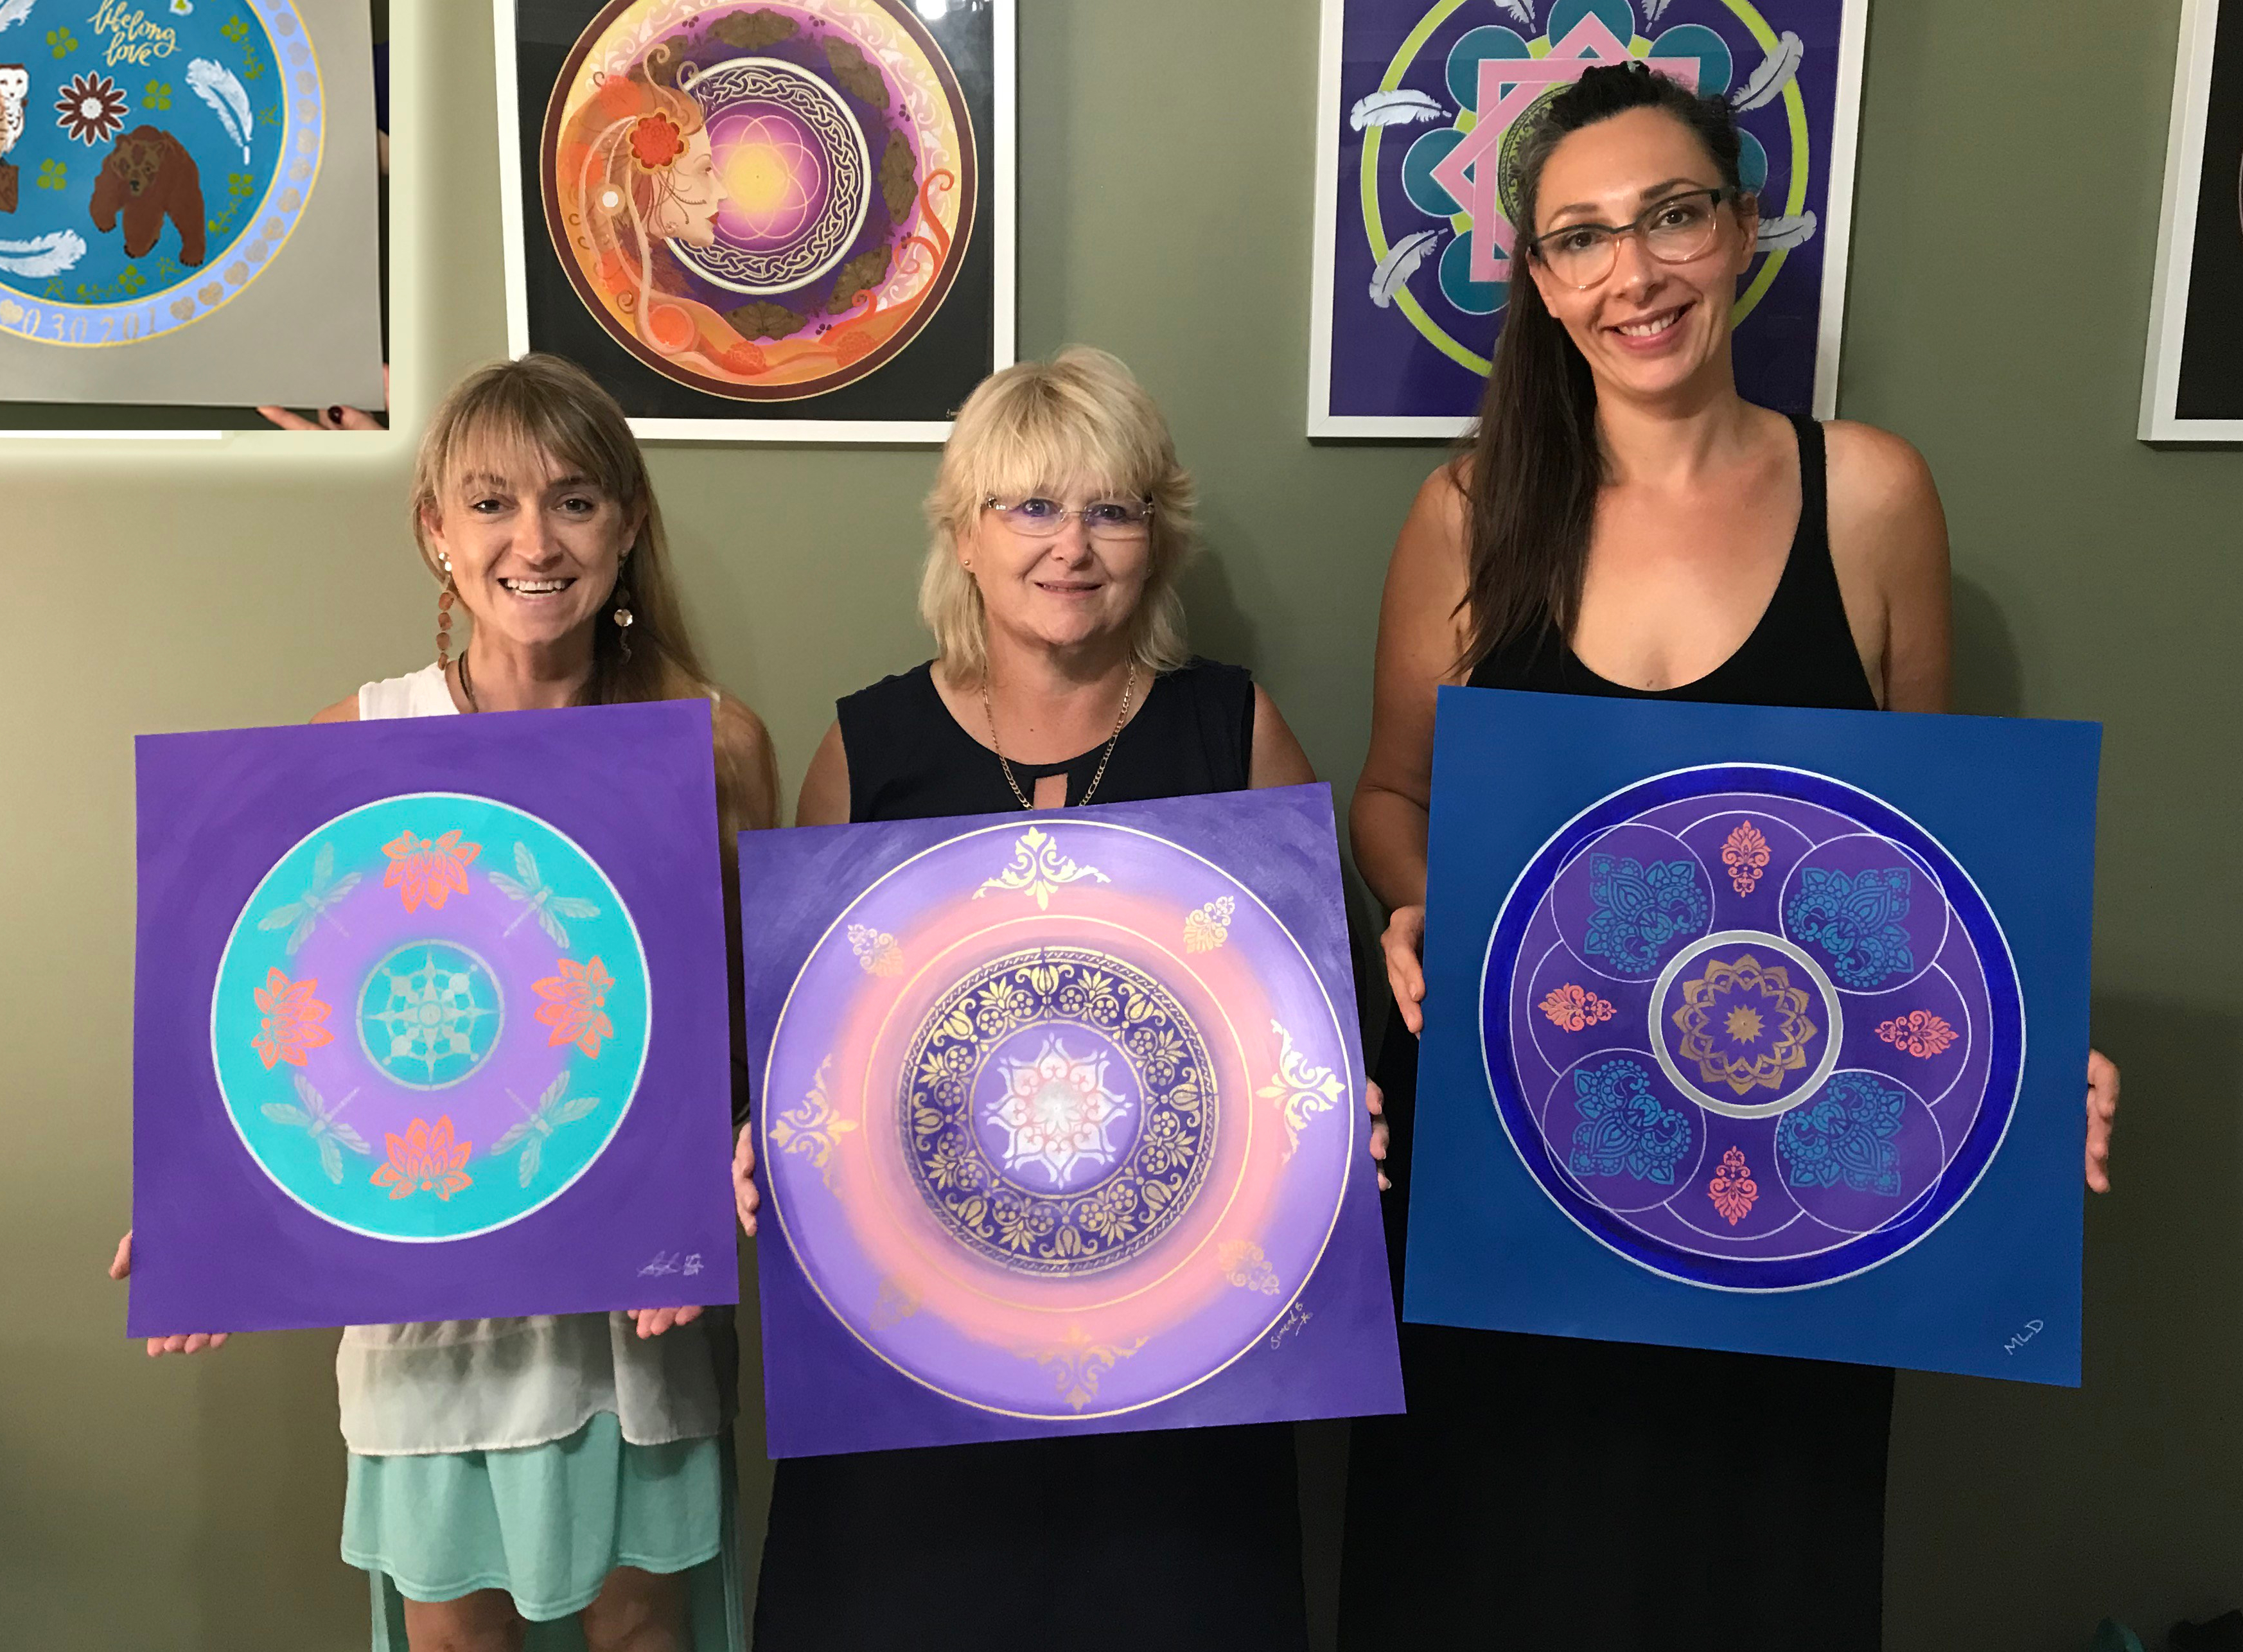 Group Acrylic Mandala Painting Intuitive Art Therapy Workshop with Embarked with Simone in Atwell, South of Perth Western Australia